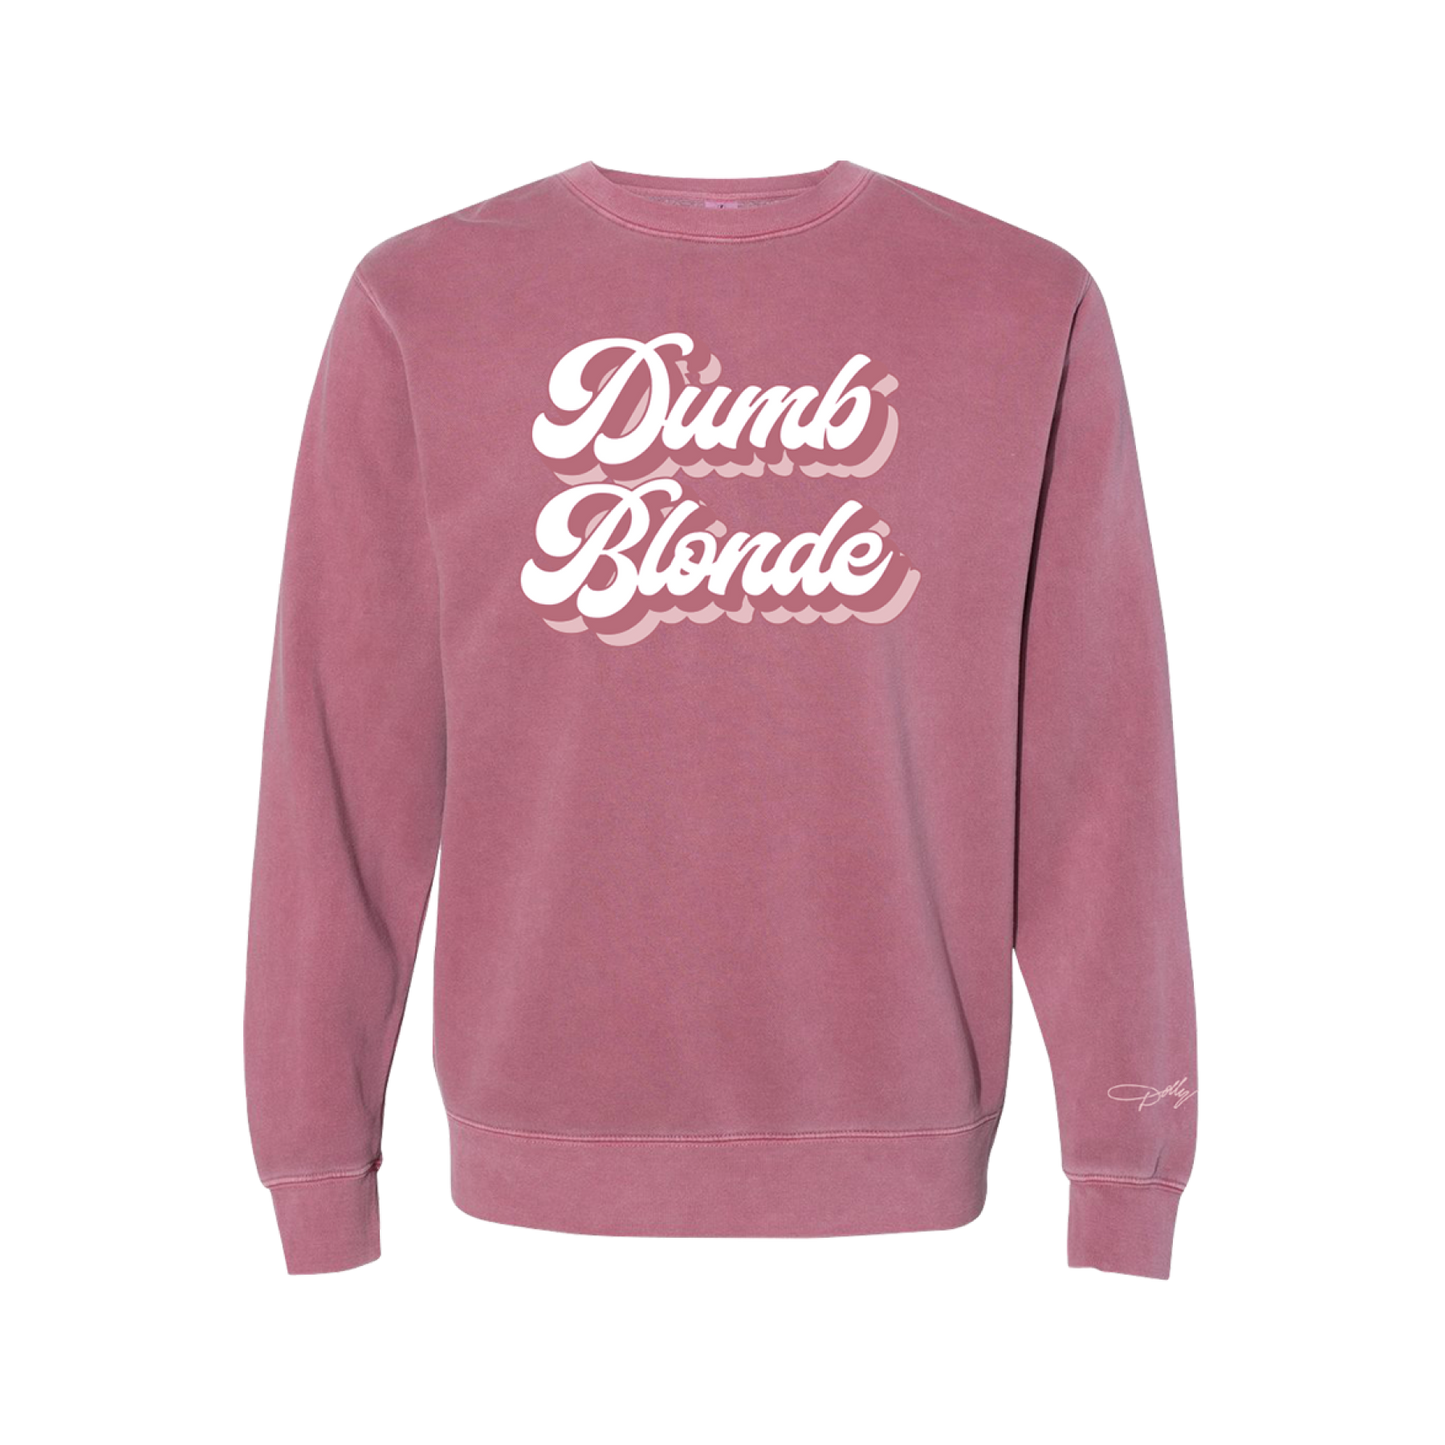 Load image into Gallery viewer, Official Dolly Parton Merchandise. Premium dark pink pigment dyed cotton crewneck sweatshirt with the words Dumb Blonde printed on the front stack with different colors of pink.
